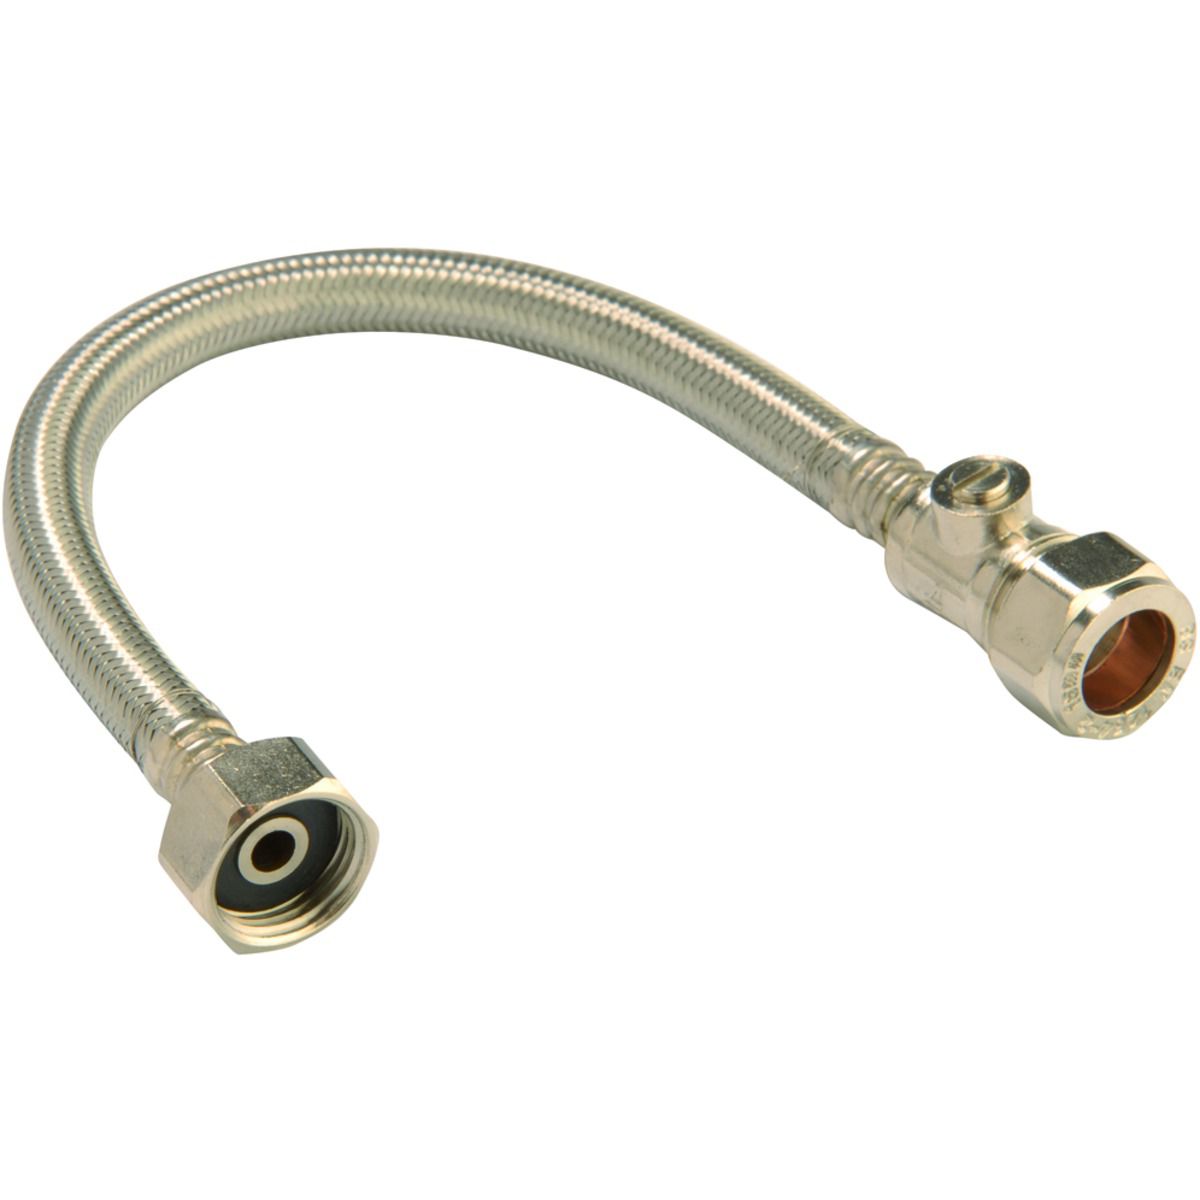 Image of Primaflow Flexible Compression Tap Connector With Isolating Valve - 22 X 19 X 500mm